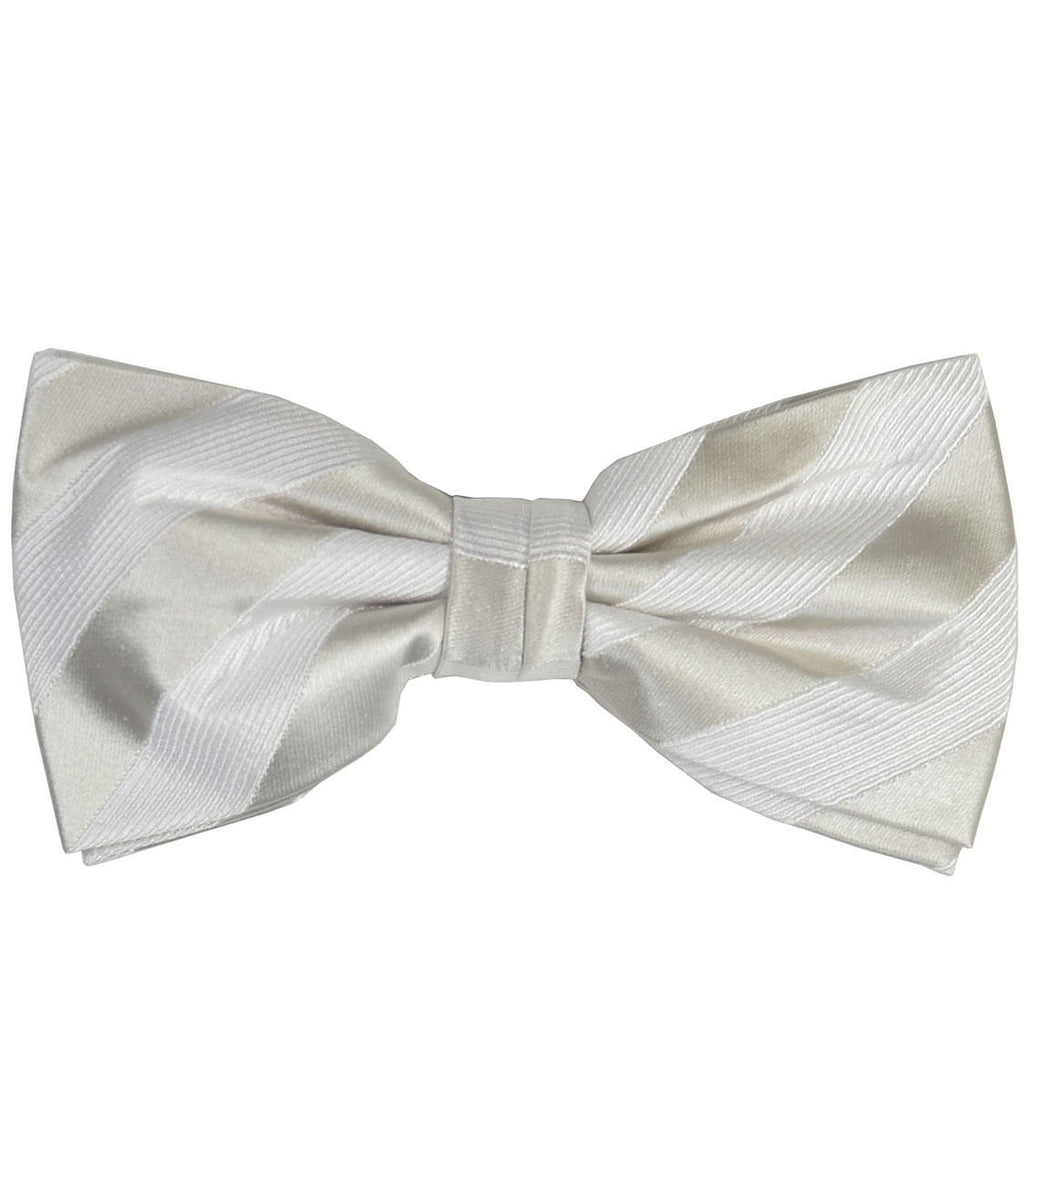 Silver and White Striped Silk Bow Tie | Paul Malone